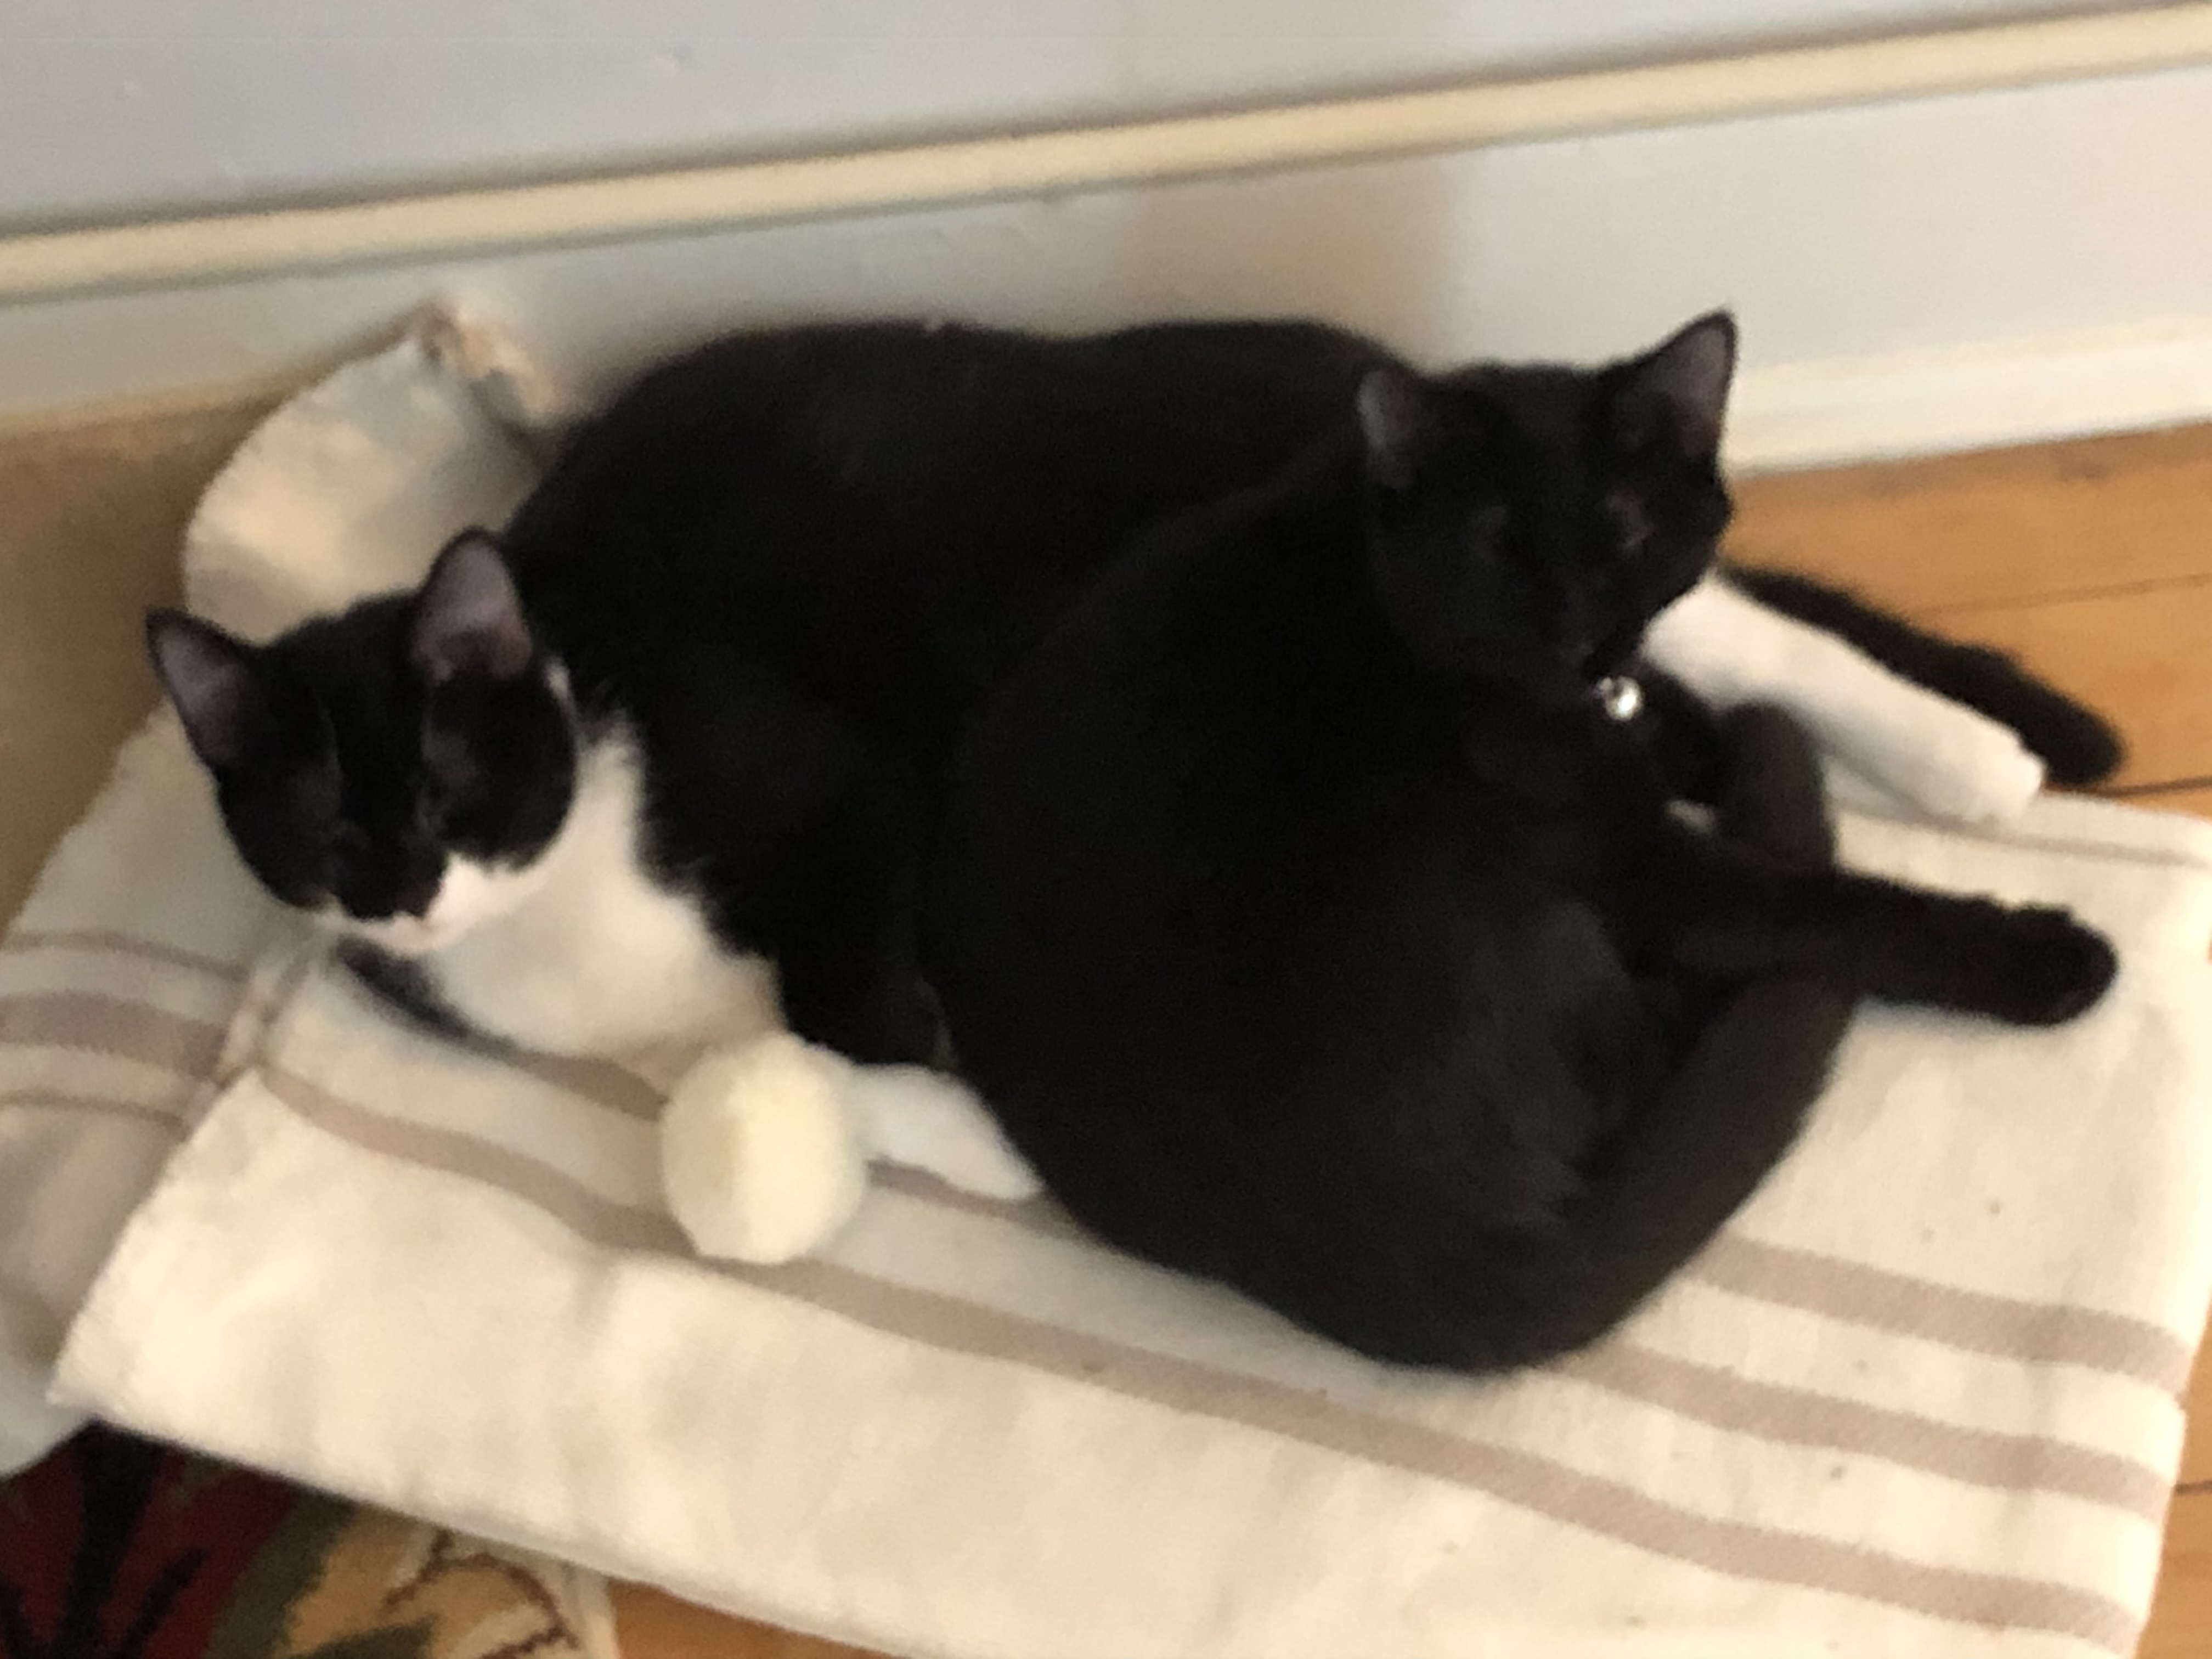 a picture of Minnie (black) and Marie (black/white) a cat that needs a foster home.